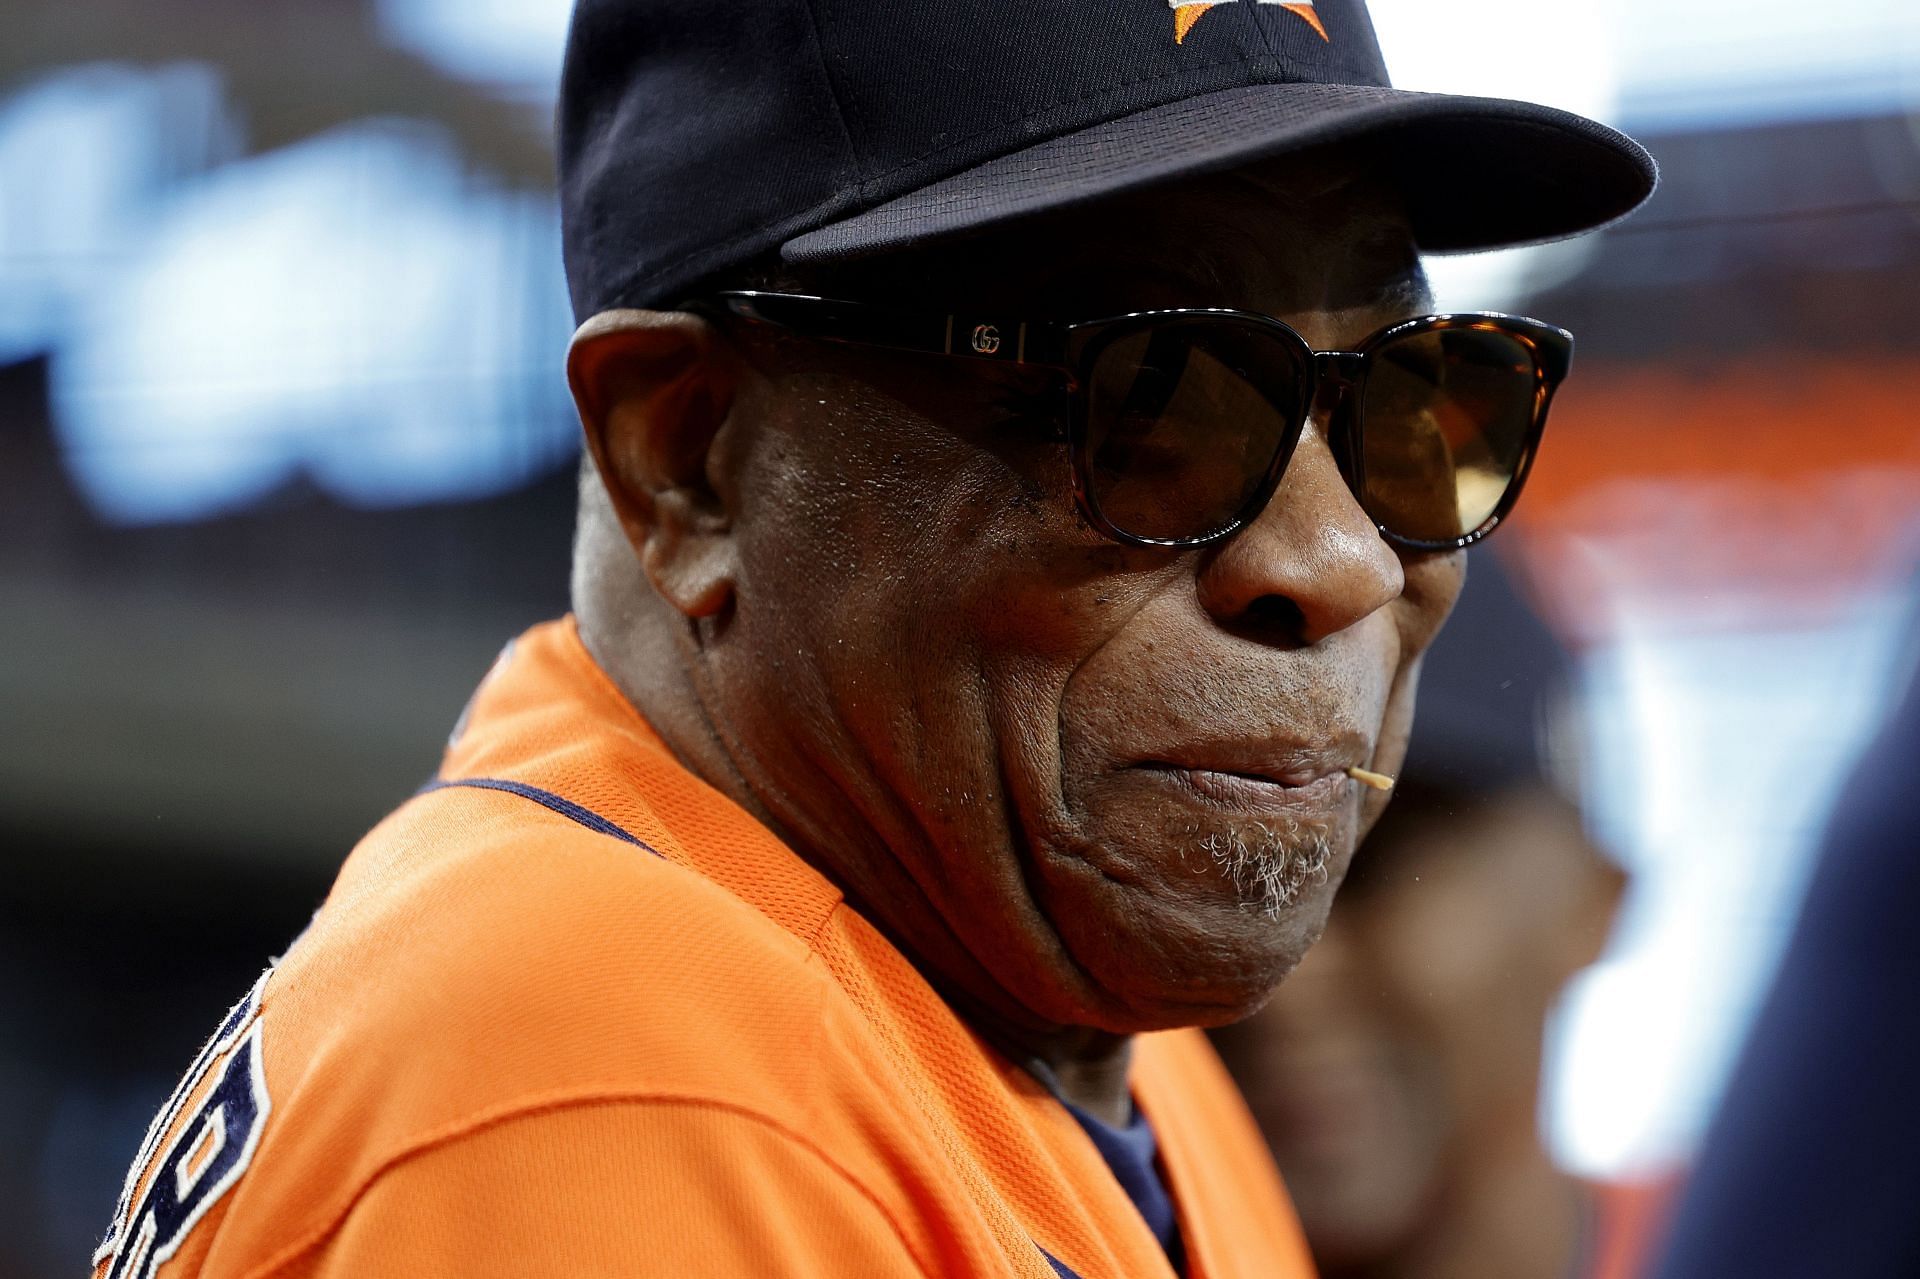 Joe Espada will step in as the manager of the Houston Astros after Dusty Baker retired following the team&rsquo;s loss in the ALCS Game 7 against the Texas Rangers.